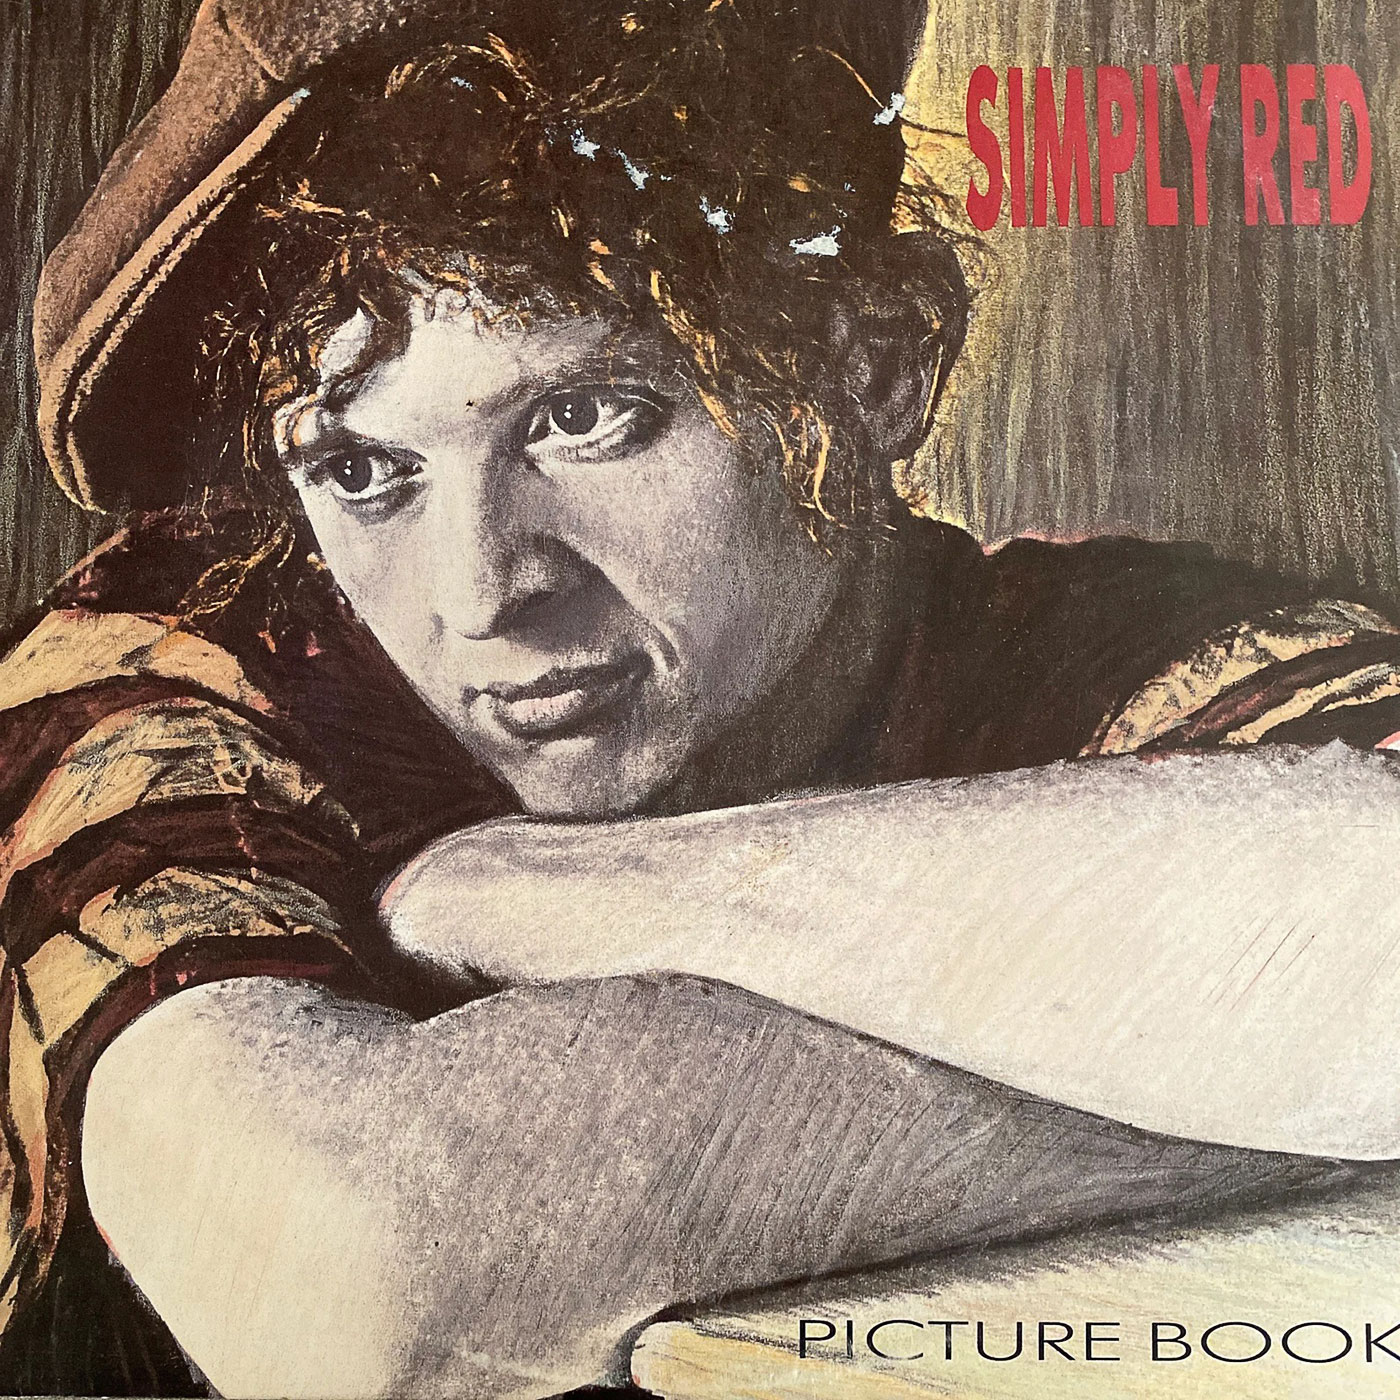 562 Simply Red – Picture Book